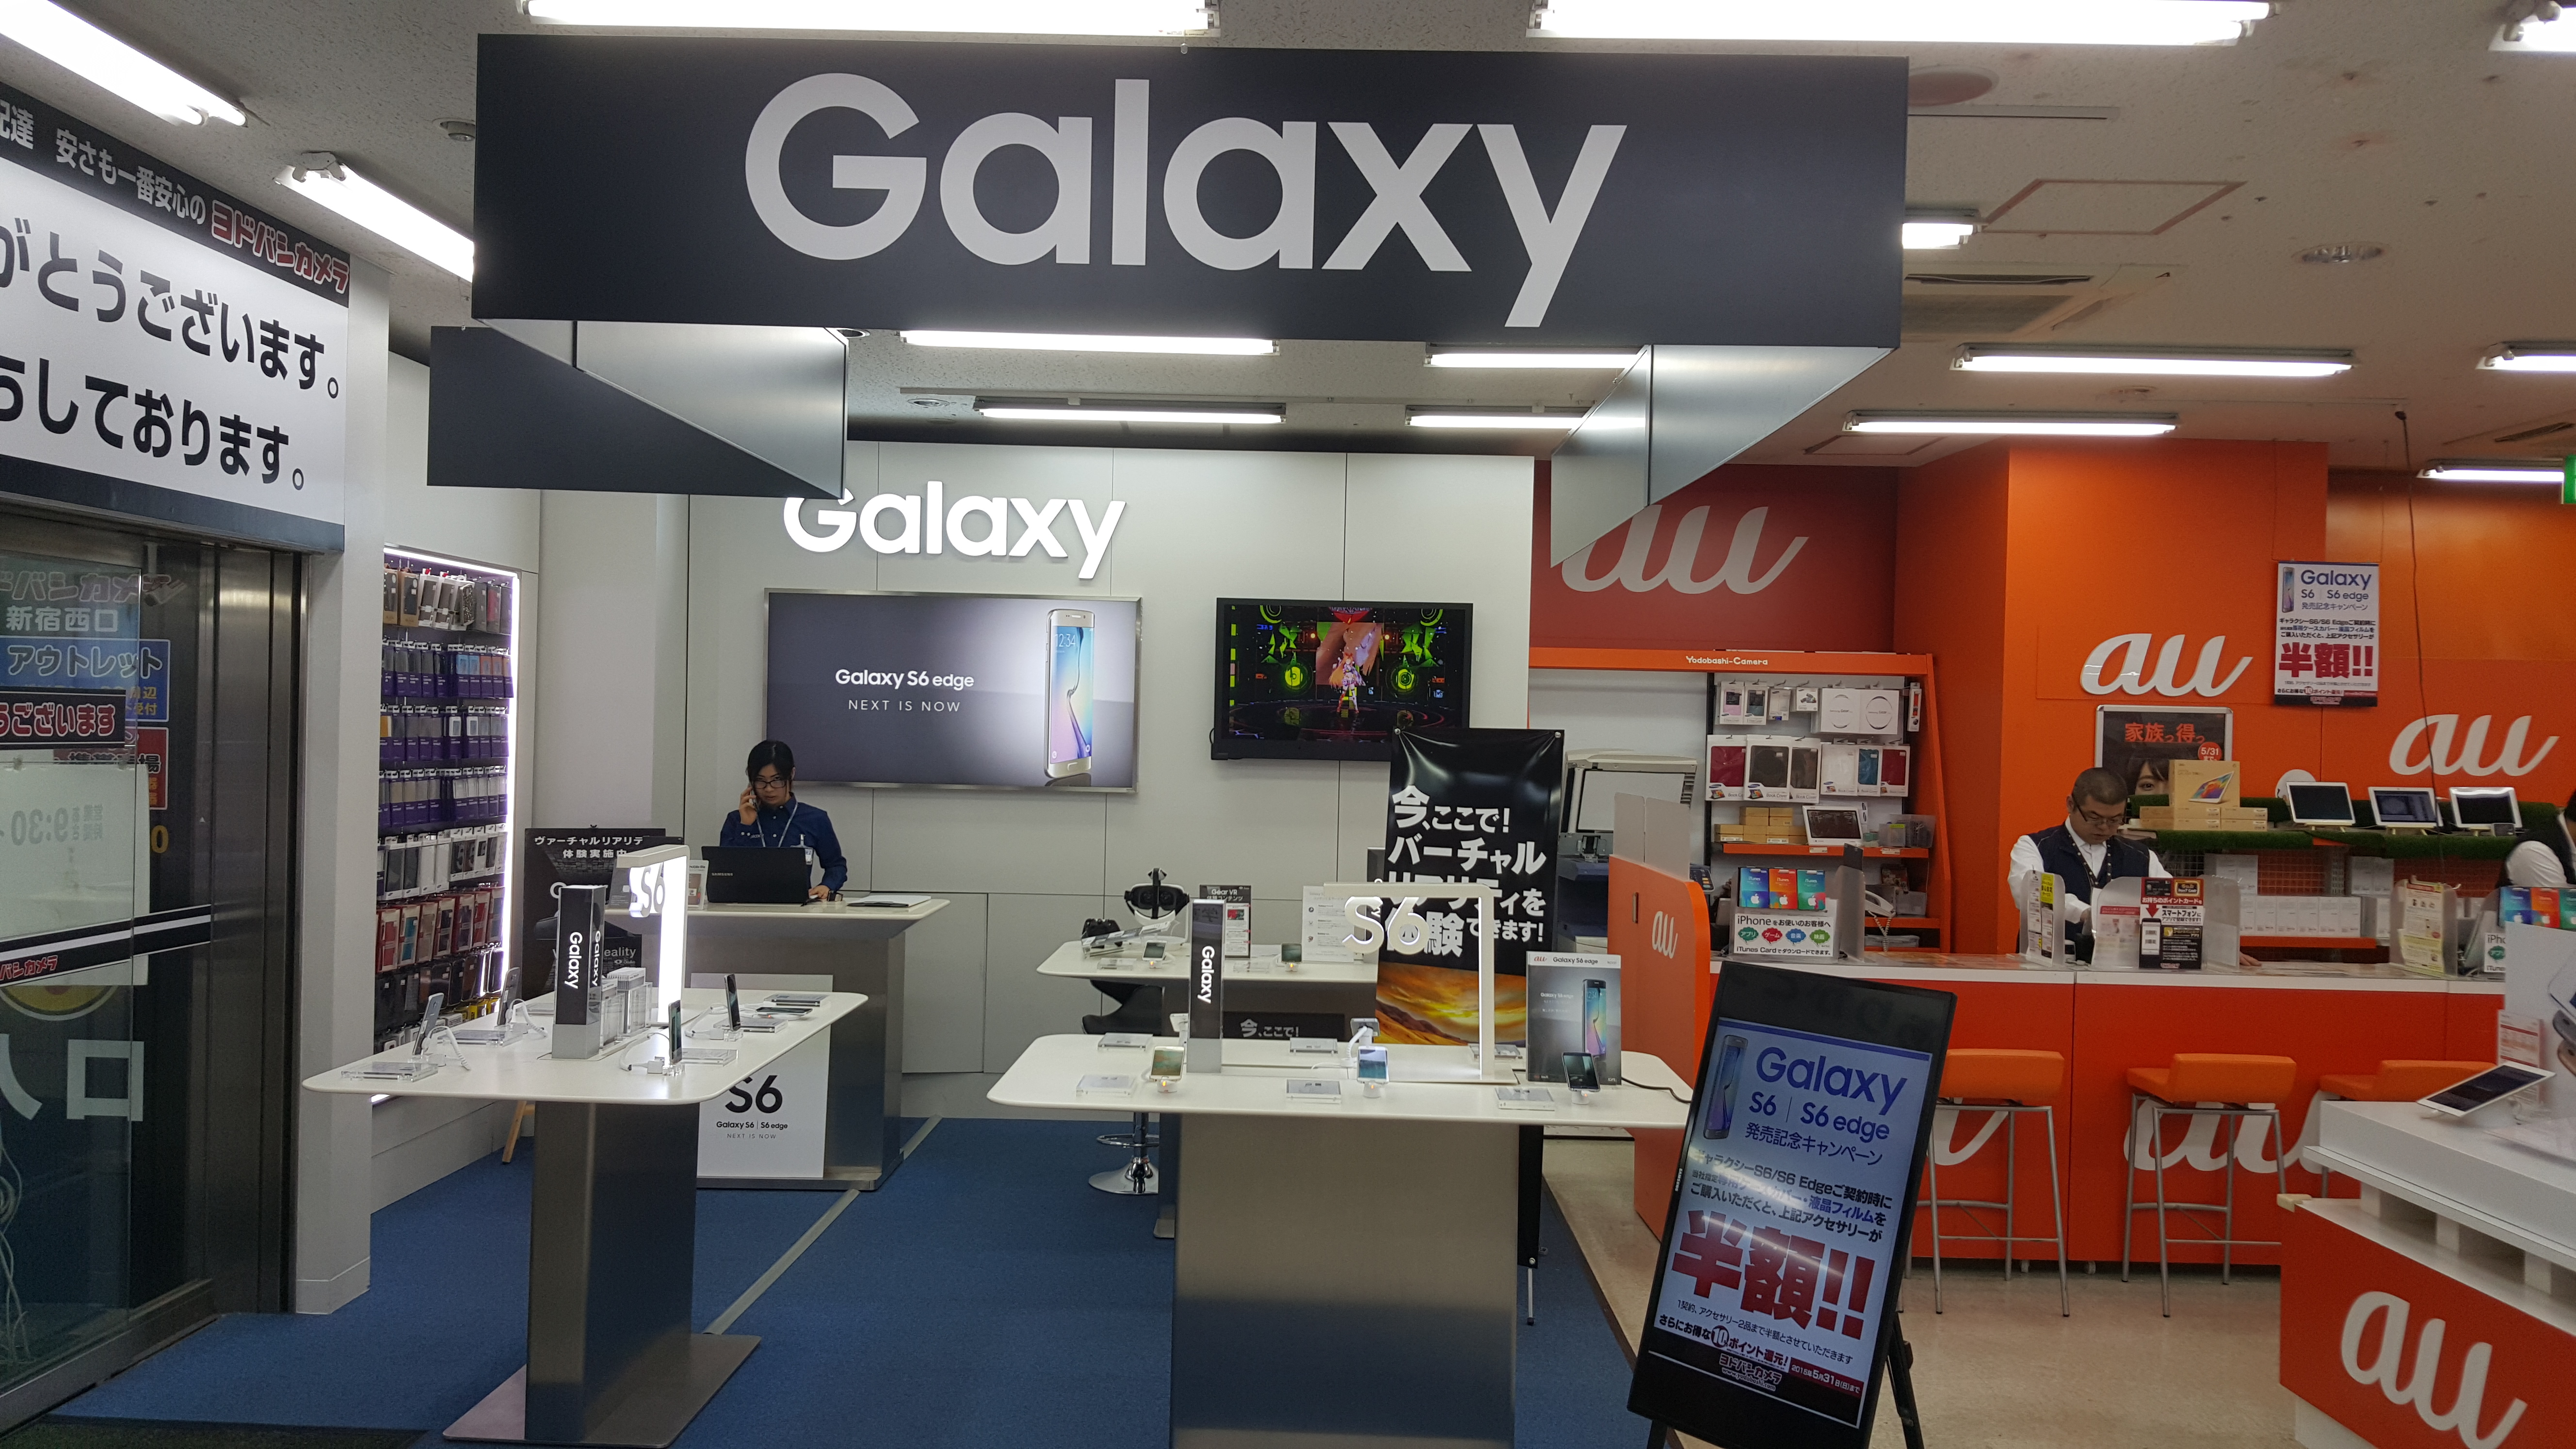 The Galaxy is everywhere. Samsung? Nowhere to be seen...